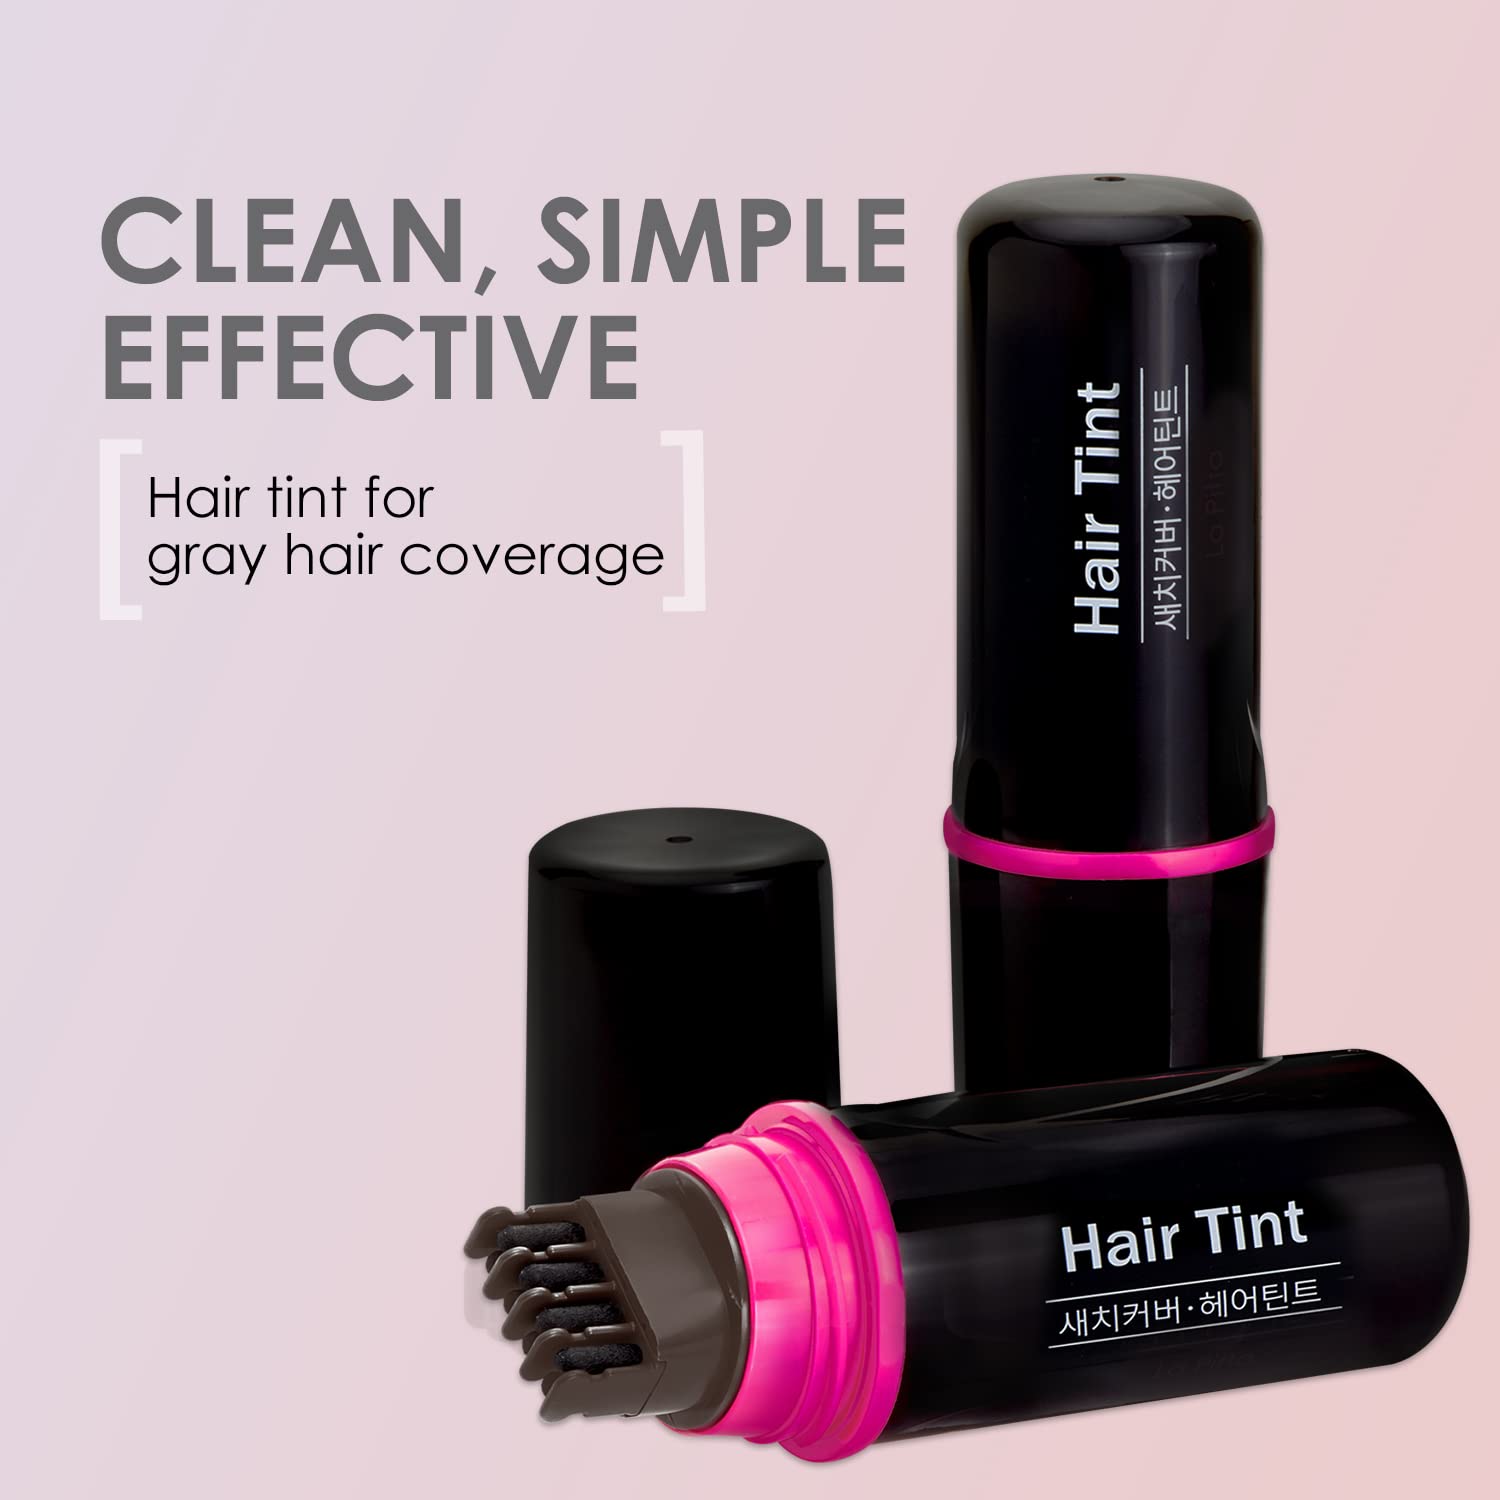 Root Touch Up Black and Brown Hair Tint for Gray Hair Cover Up, Hair Dye that does not stick to the scalp, 5 Sec Easy Touch Up, Instant Correction & Spot Precision with Comb Applicator - 10 ml